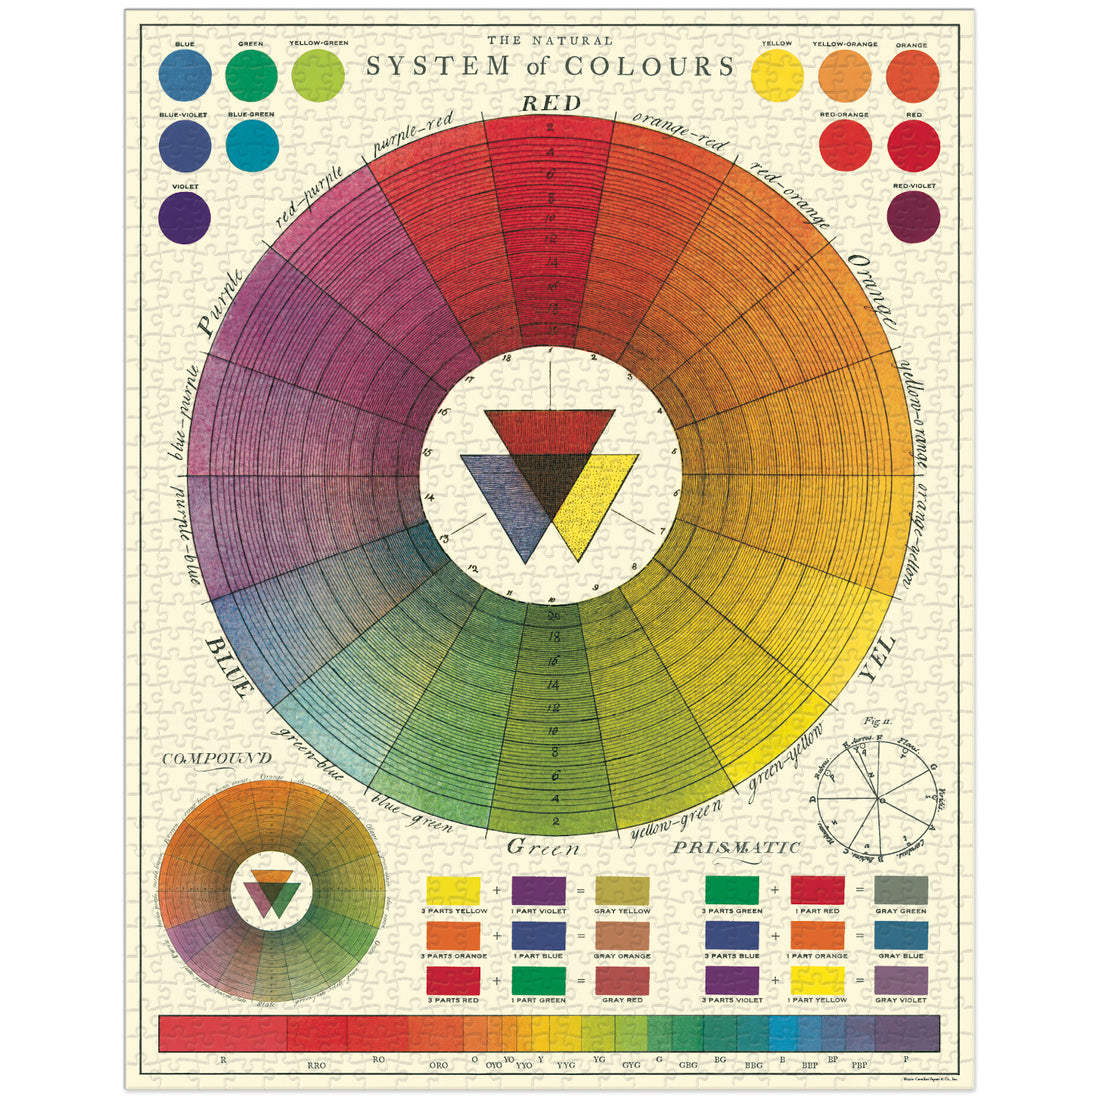 Replace: A 1000-piece Color Wheel Puzzle
With: A 1000-piece Cavallini Papers &amp; Co Color Wheel Puzzle